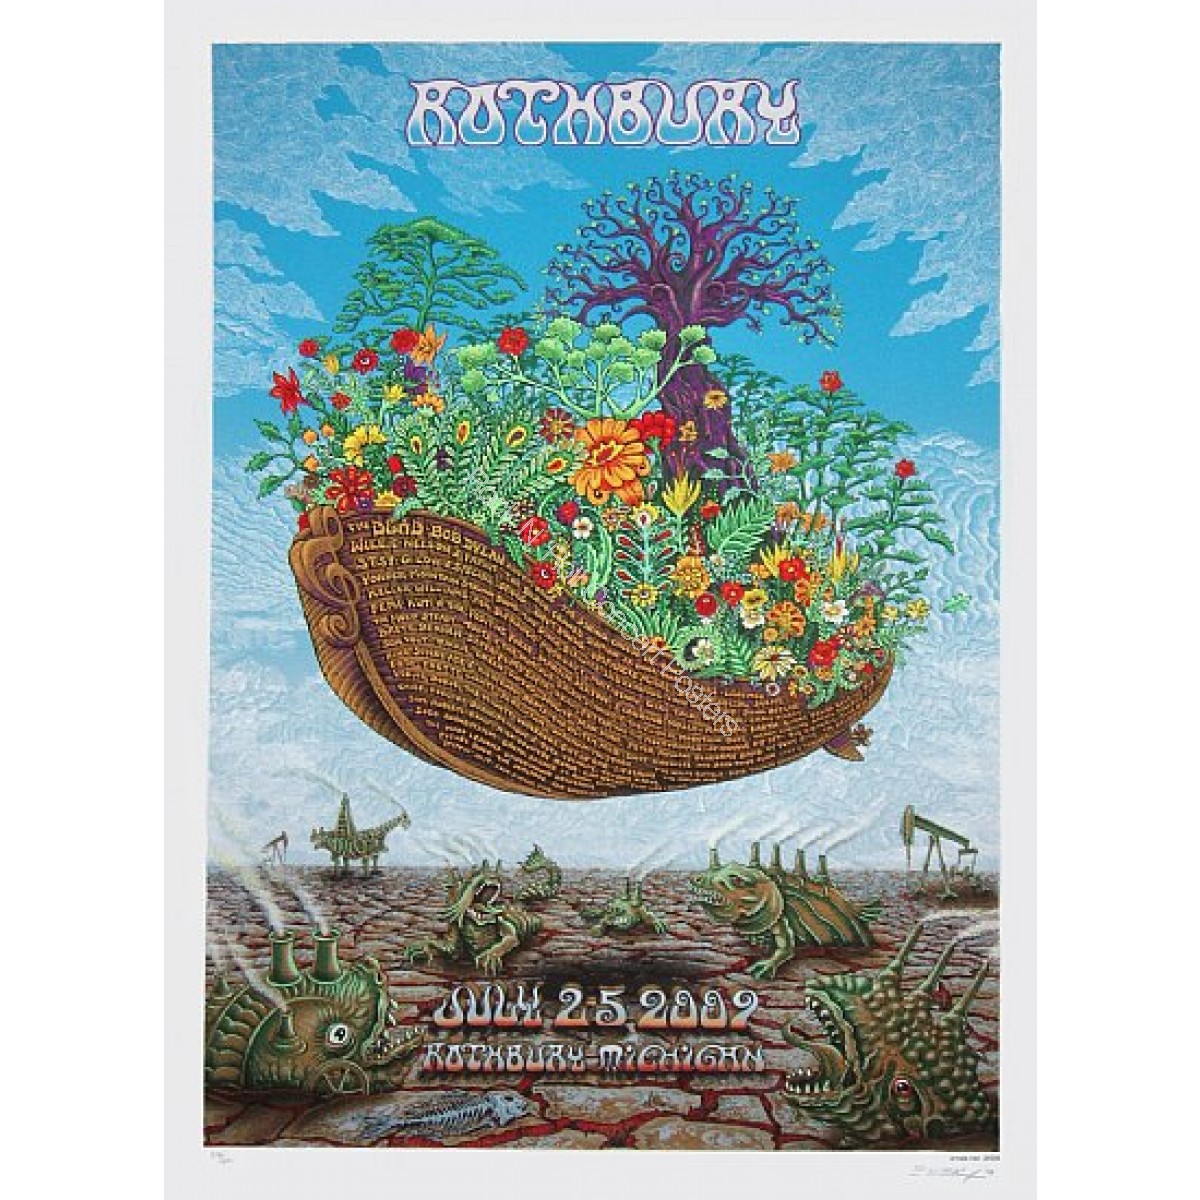 Rothbury Festival 2009 Official Event Poster S/N By Emek